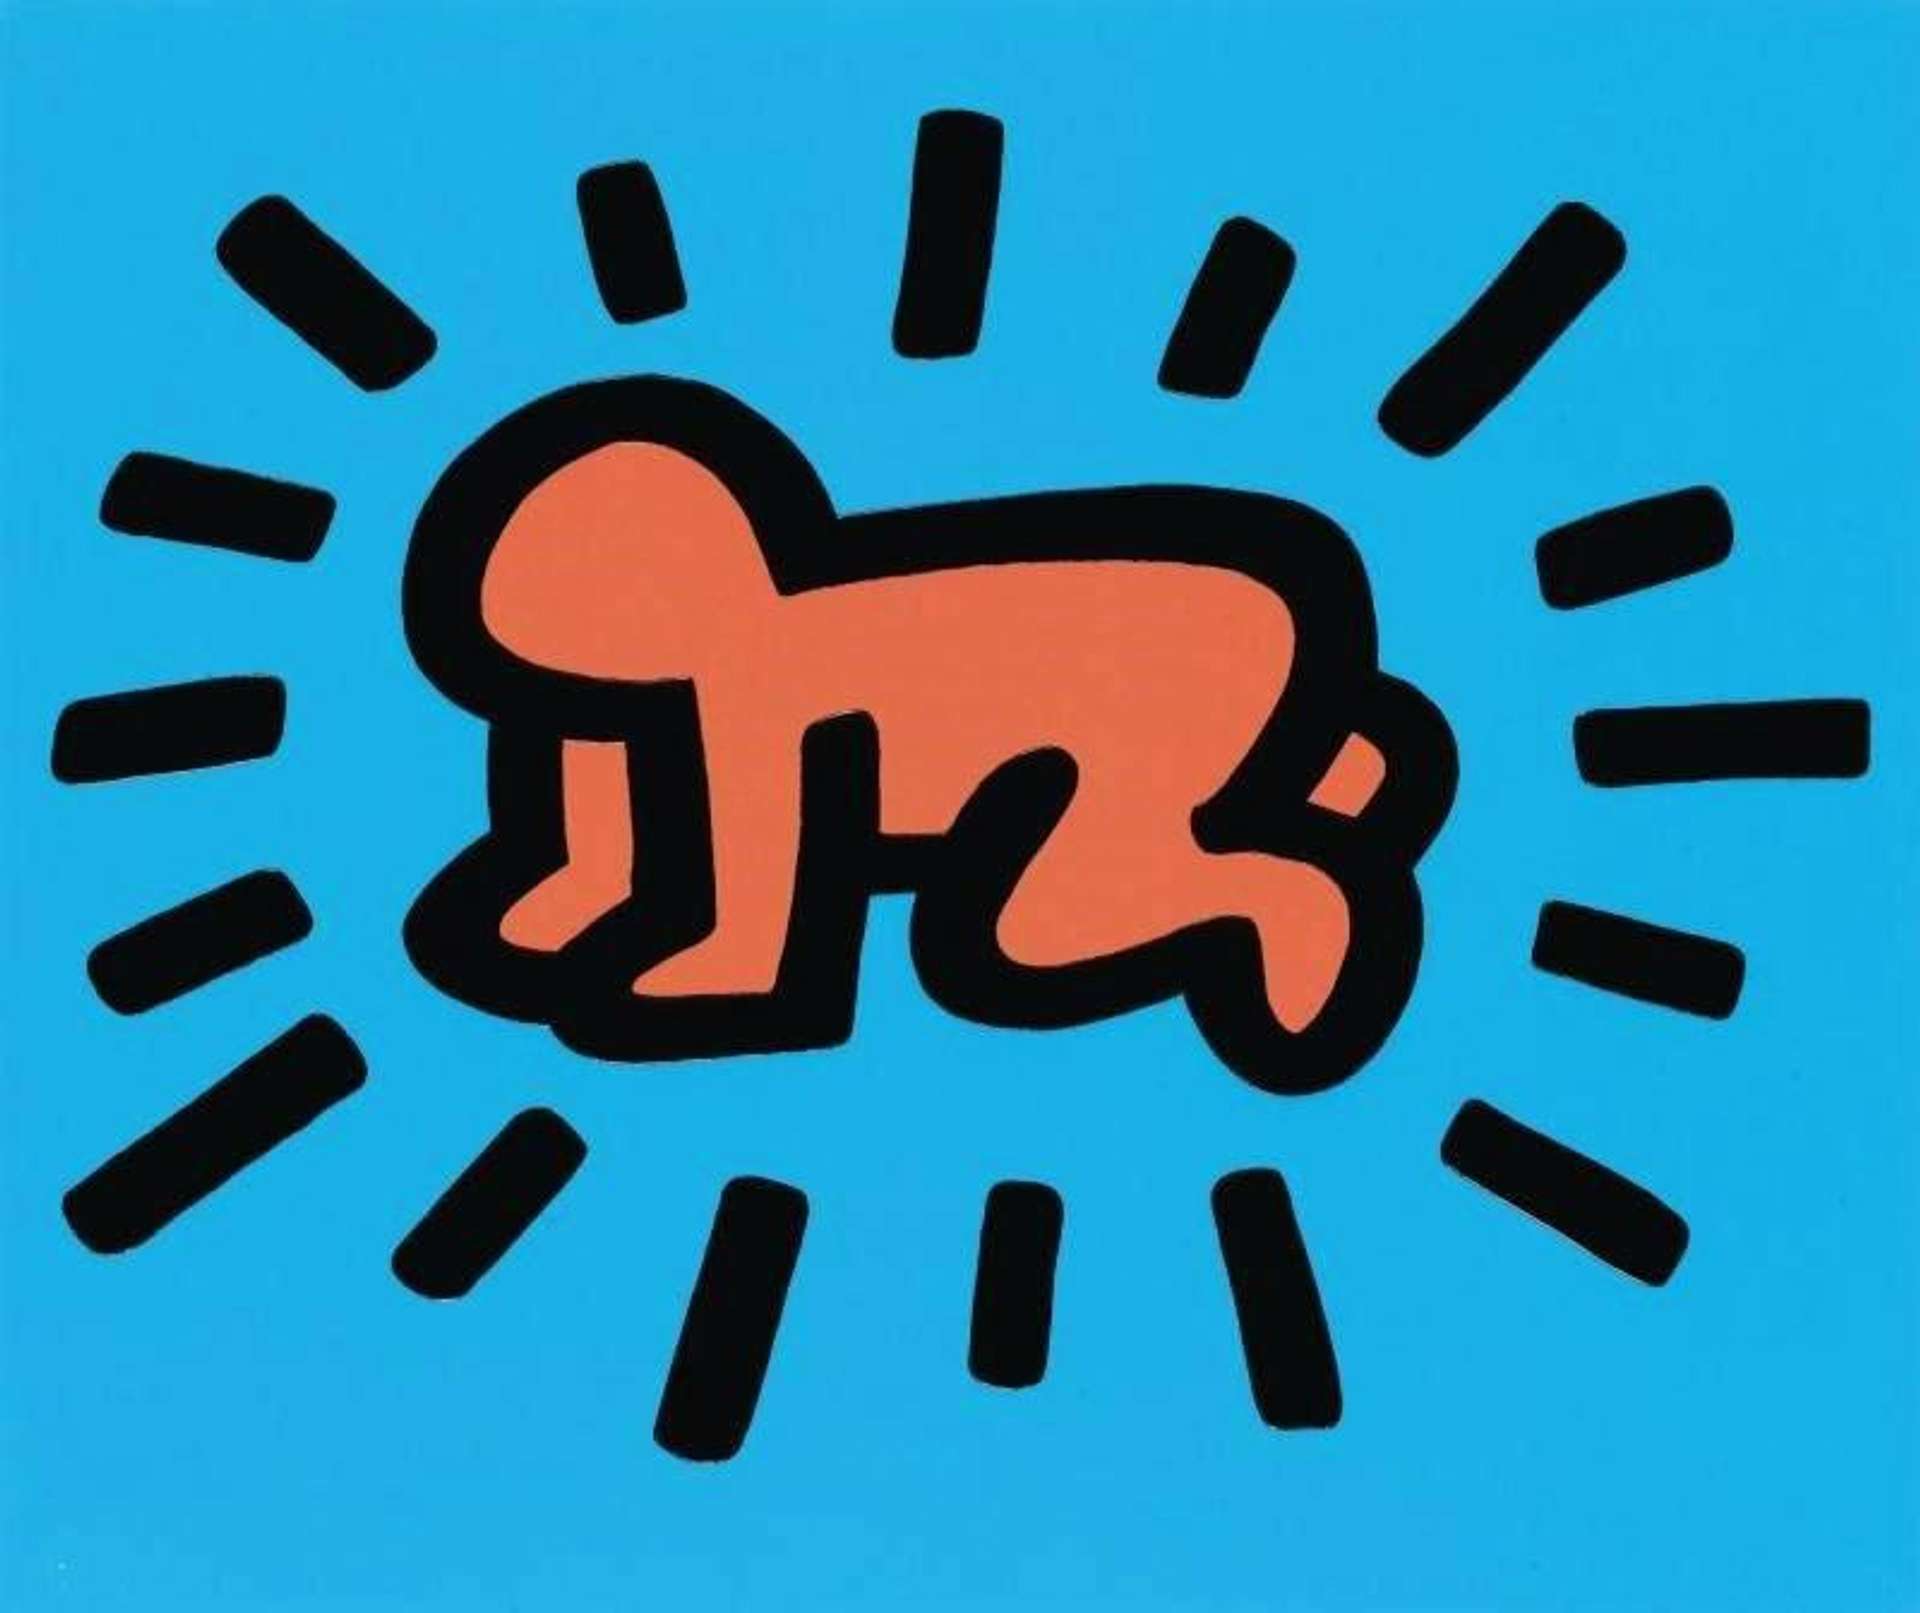 Radiant Baby by Keith Haring. The print depicts a crawling, red baby on a blue background, with lines radiating around the baby.